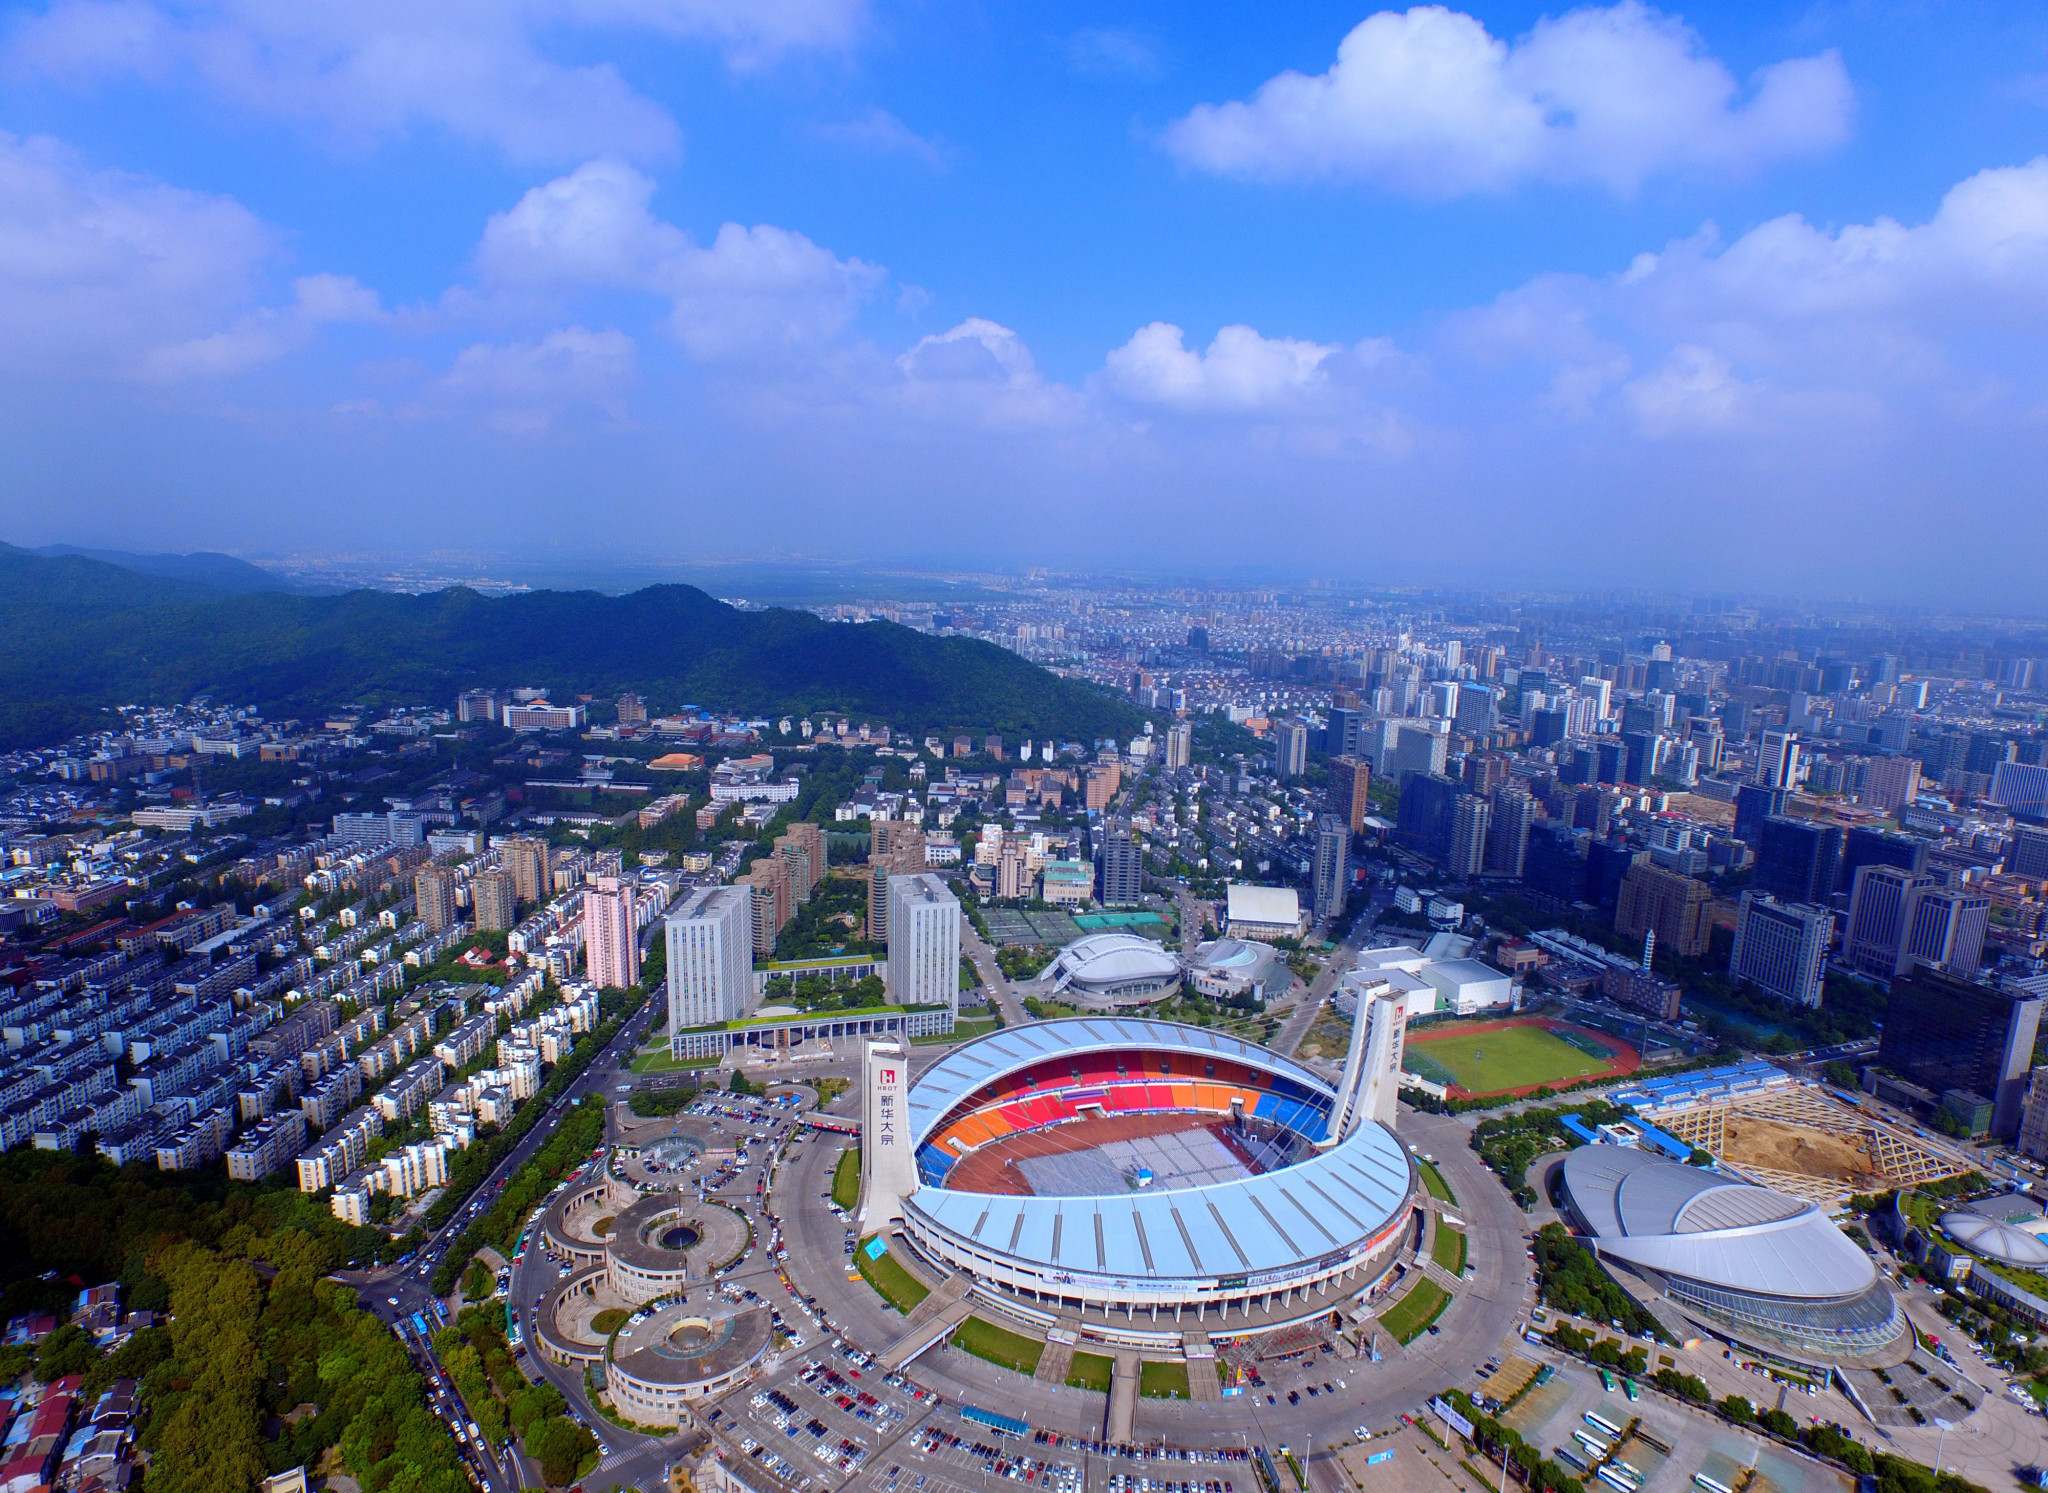 Hangzhou will hold the 19th edition of the Asian Games in 2022 ©Getty Images